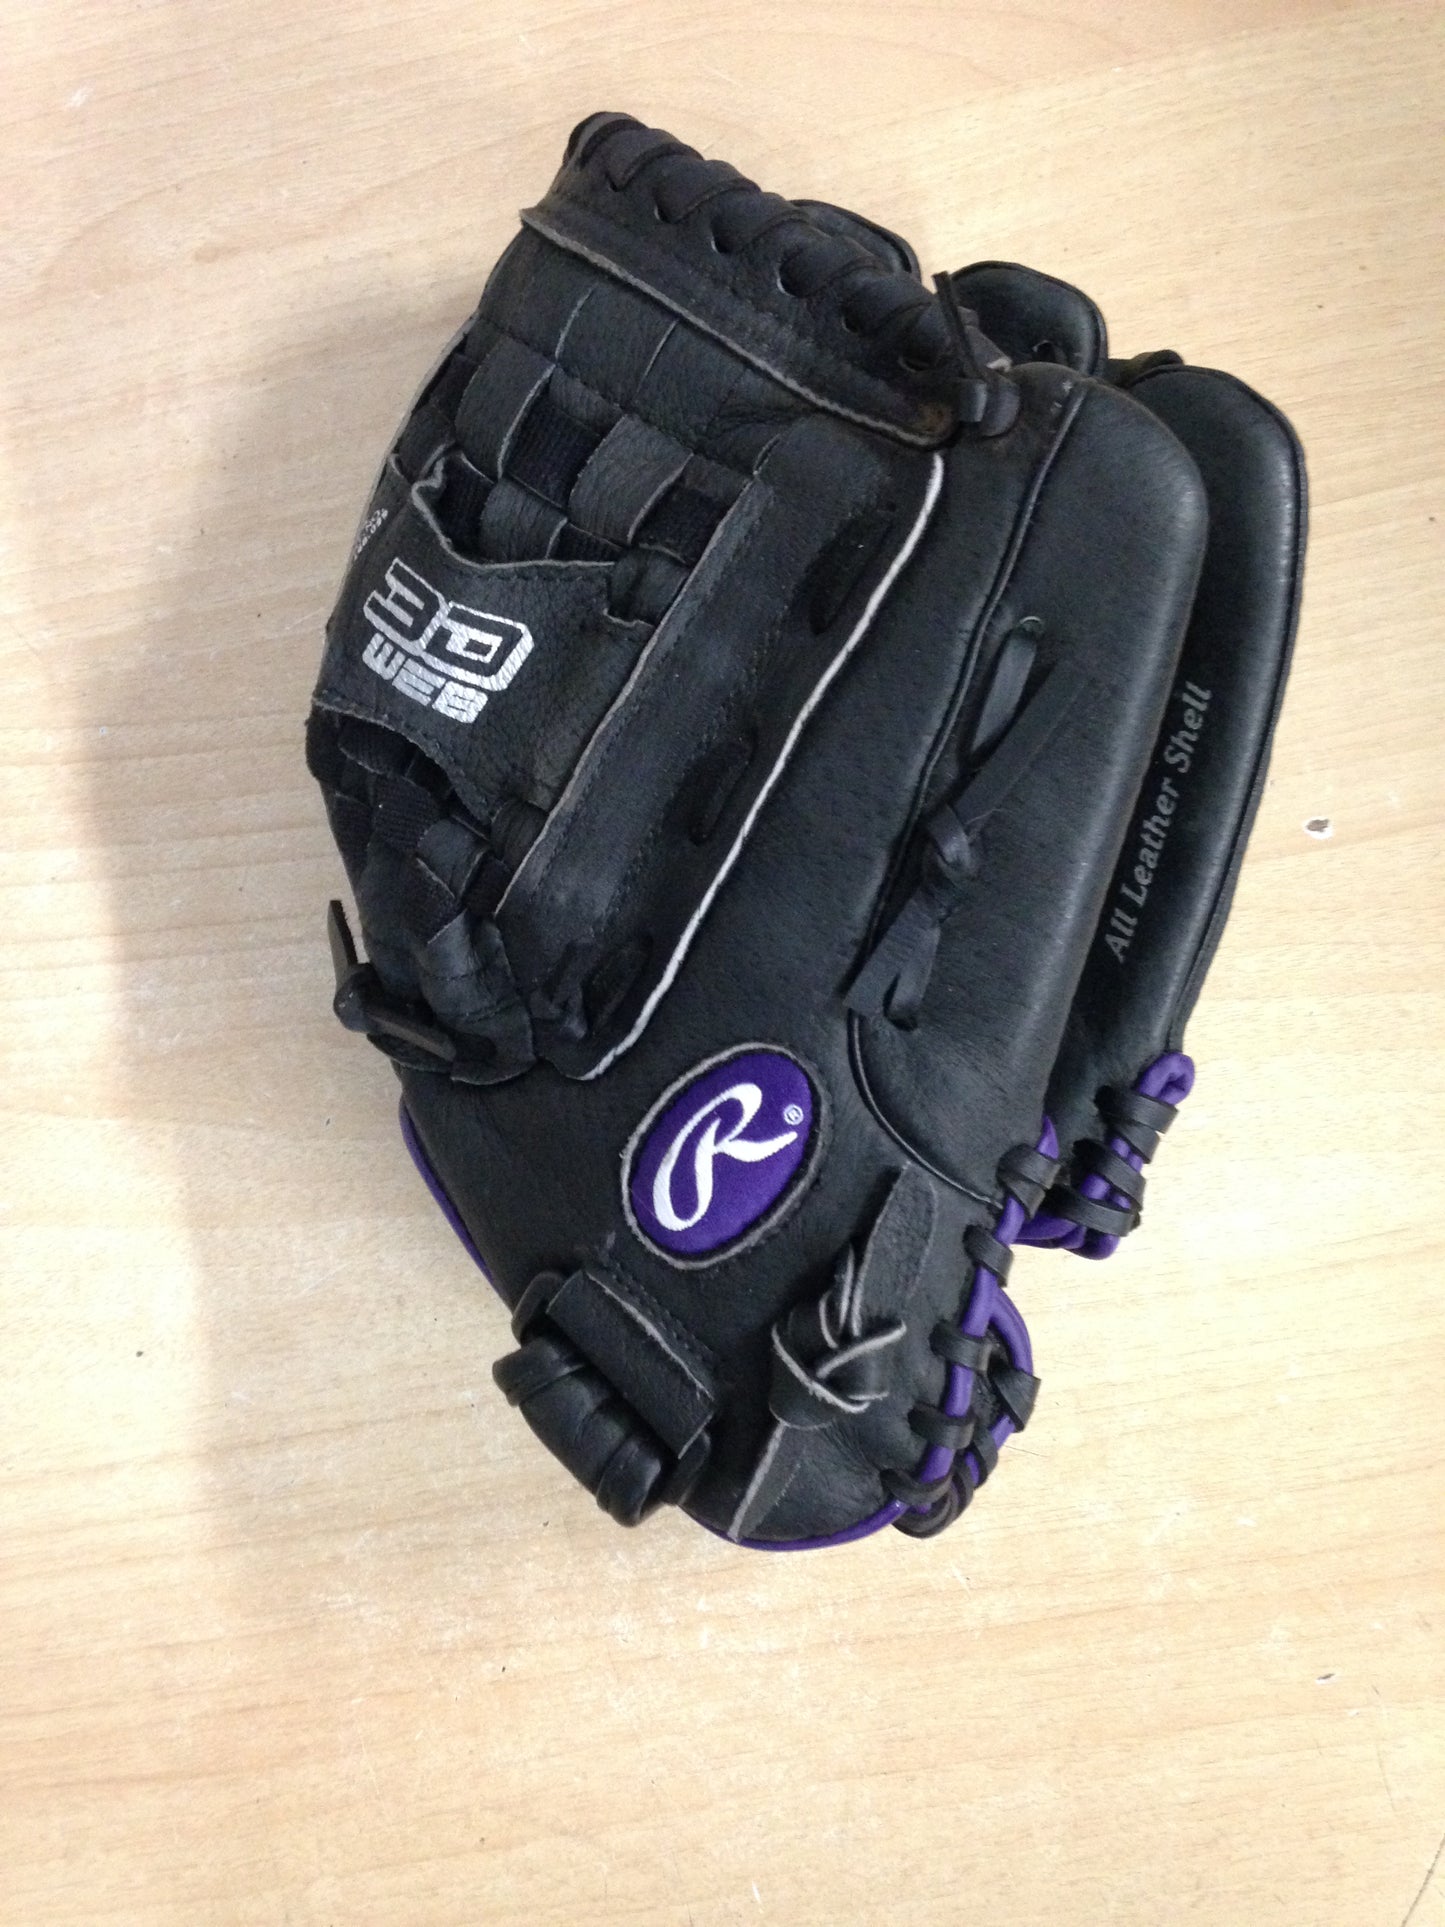 Baseball Glove Adult Size 12.5 inch Rawlings Gold Glove Black Purple Soft Leather As New Fits on Left Hand